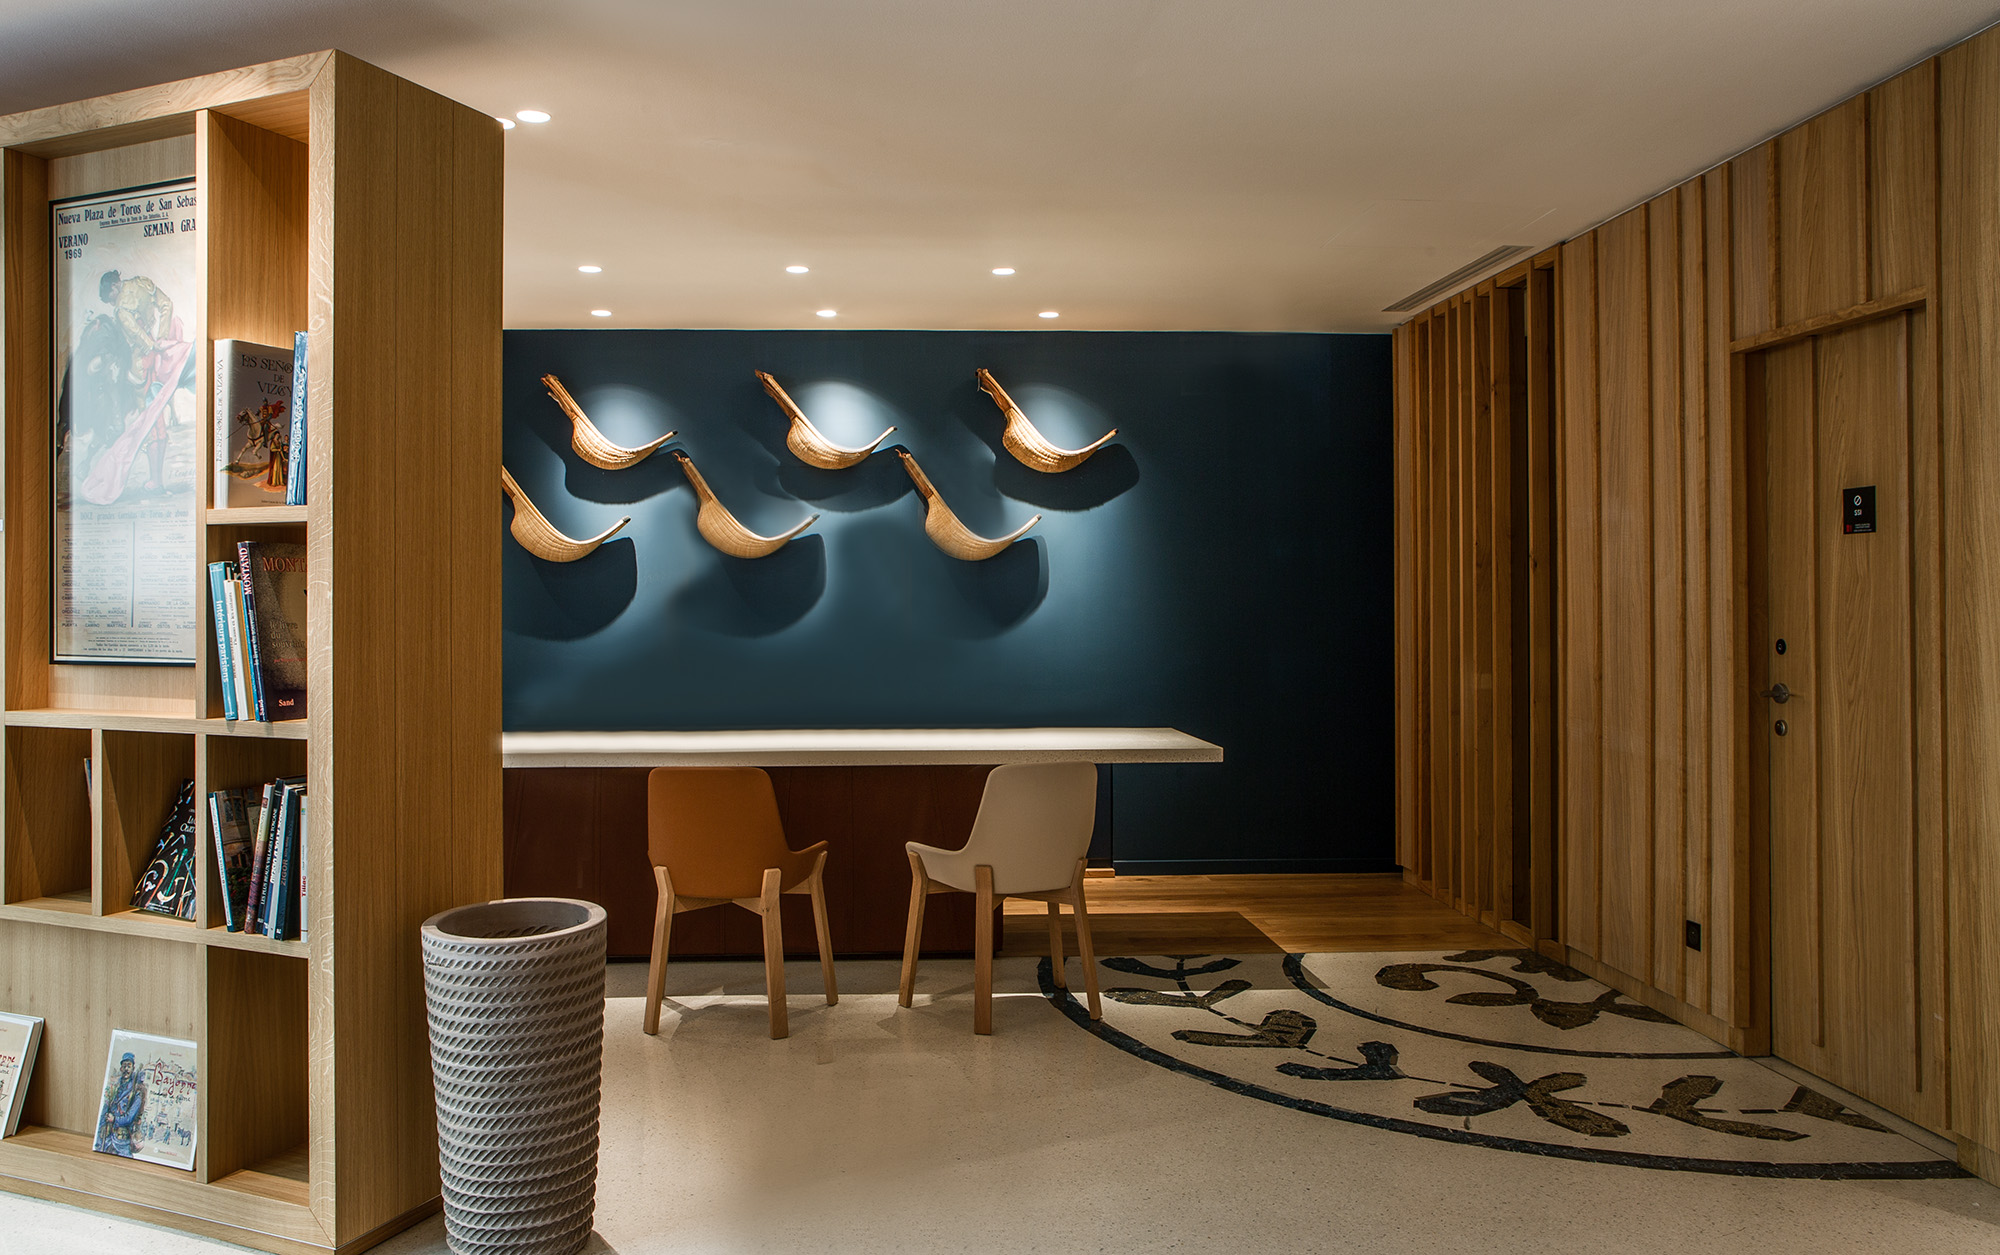 Hotel Villa Koegui Bayonne, 4 star lifestyle hotel designed by the interior design studio jean-philippe nuel, basque country, reception, mosaic floor, traditional object